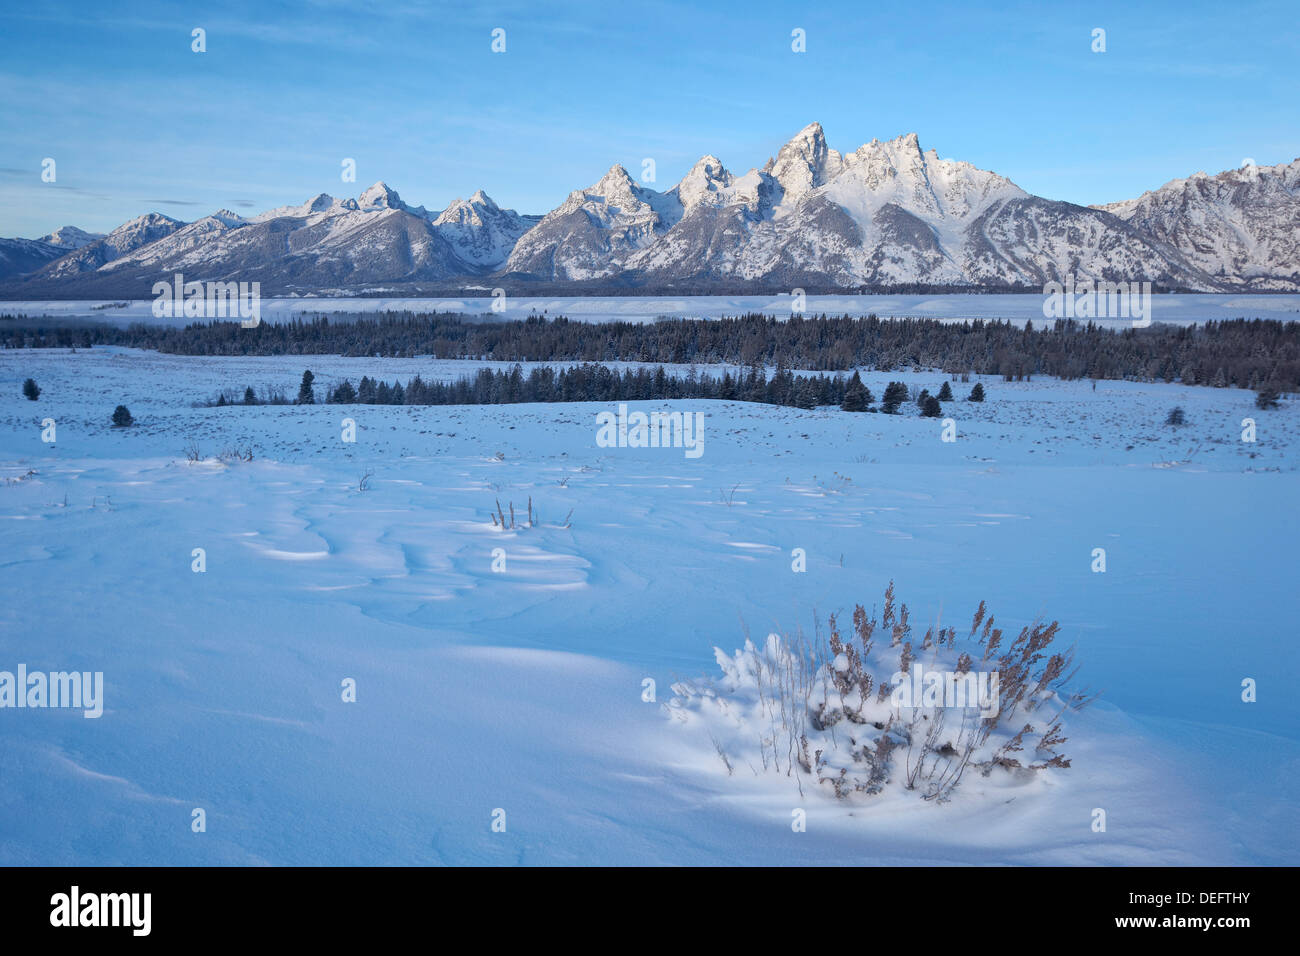 The Tetons at dawn after a fresh snow, Grand Teton National Park, Wyoming, United States of America, North America Stock Photo